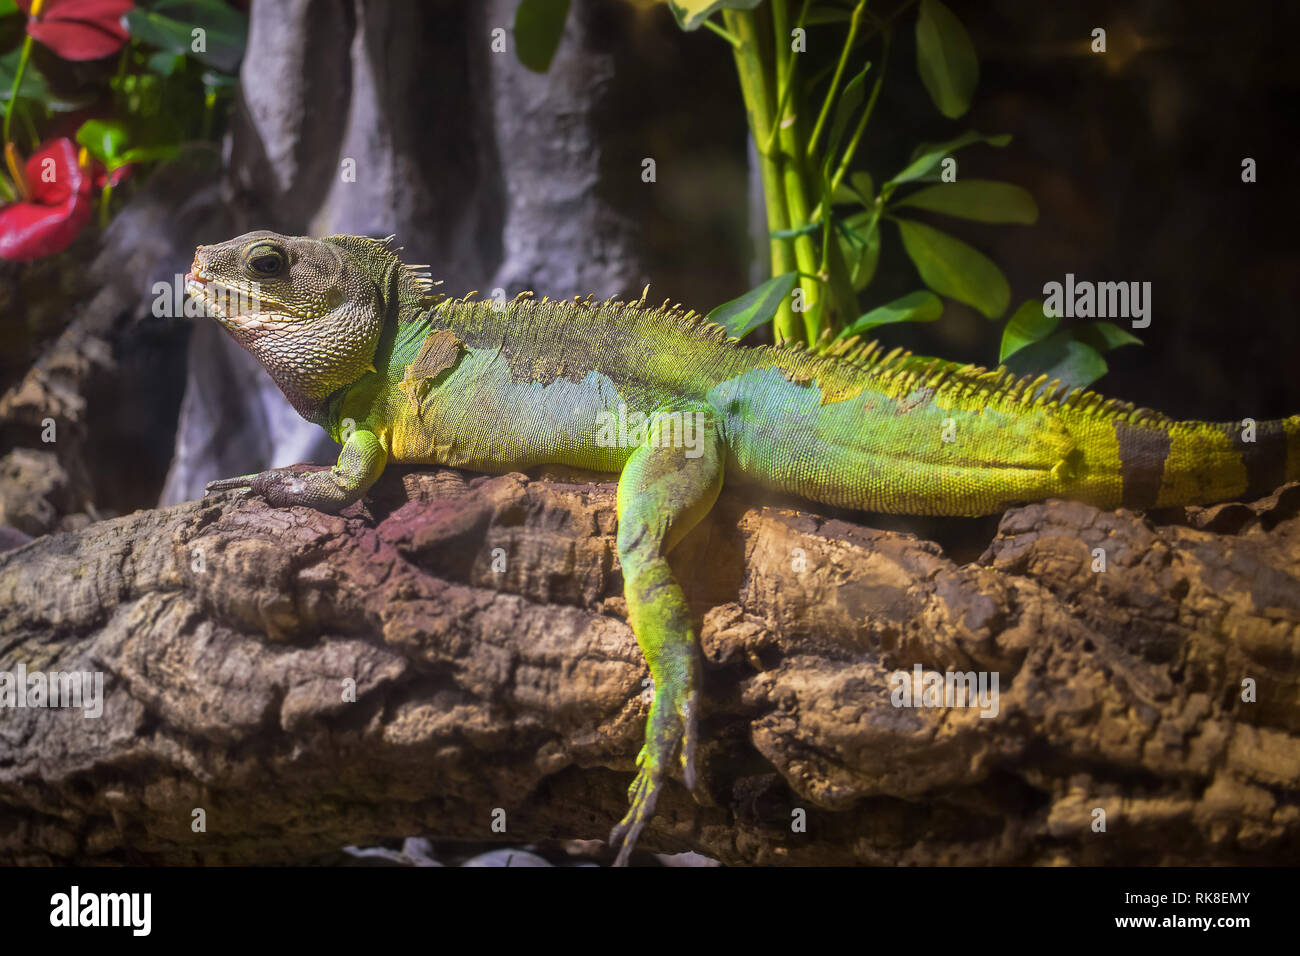 A green iguana standing on a branch,This arboreal lizard is also known as common iguana or American iguana and is native to Central and South America Stock Photo